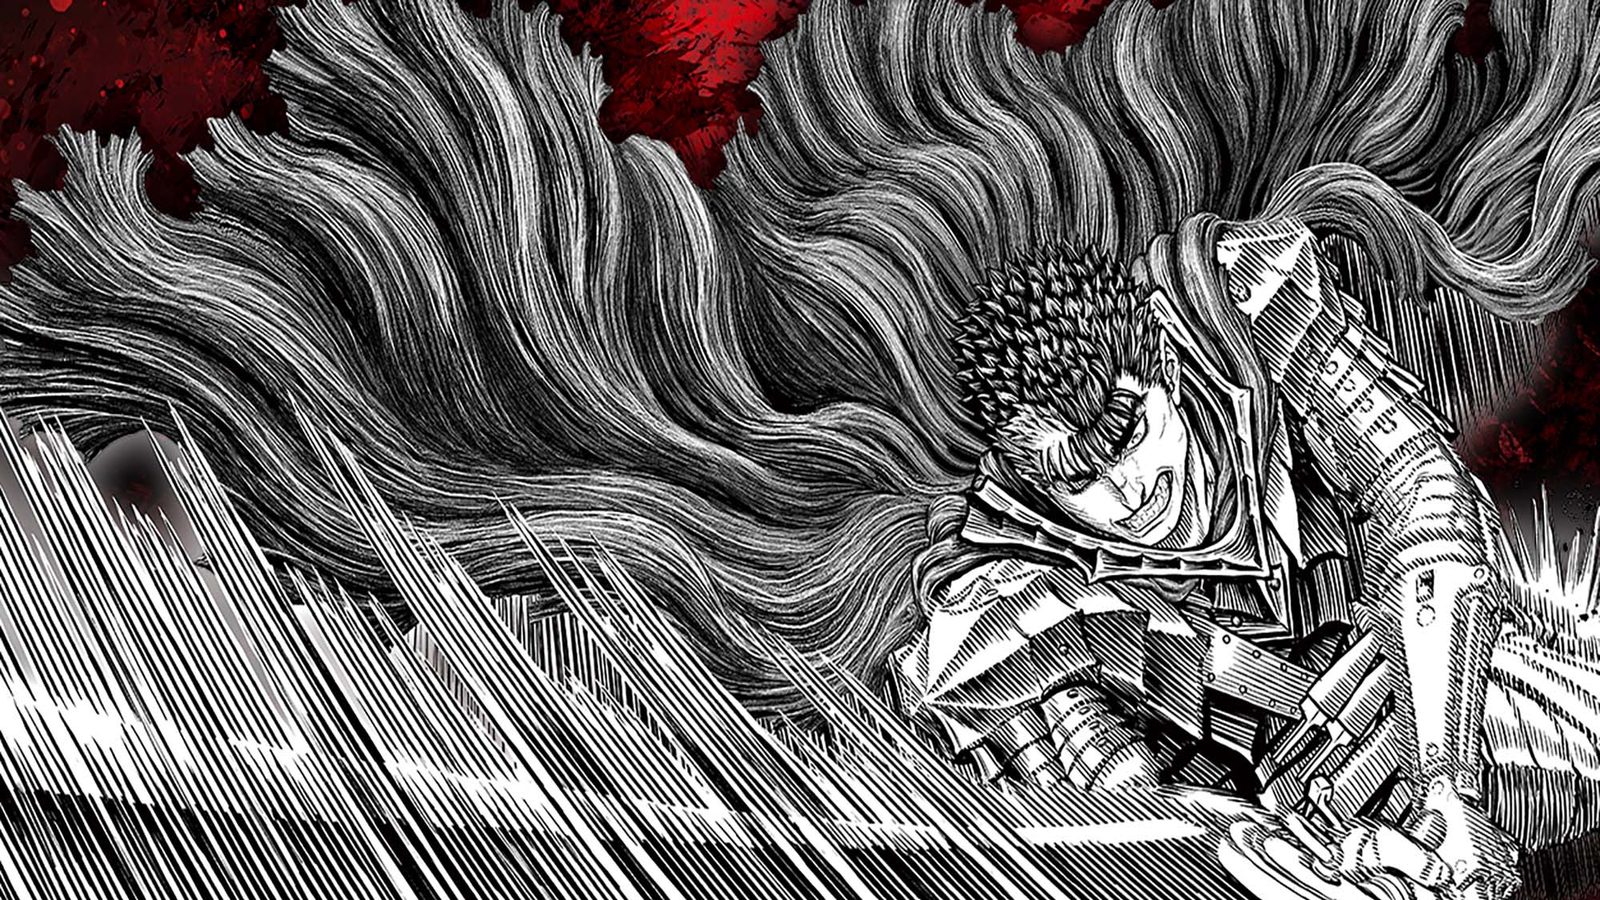 Berserk watch order: How to watch Kentaro Miura's anime in release and  chronological order